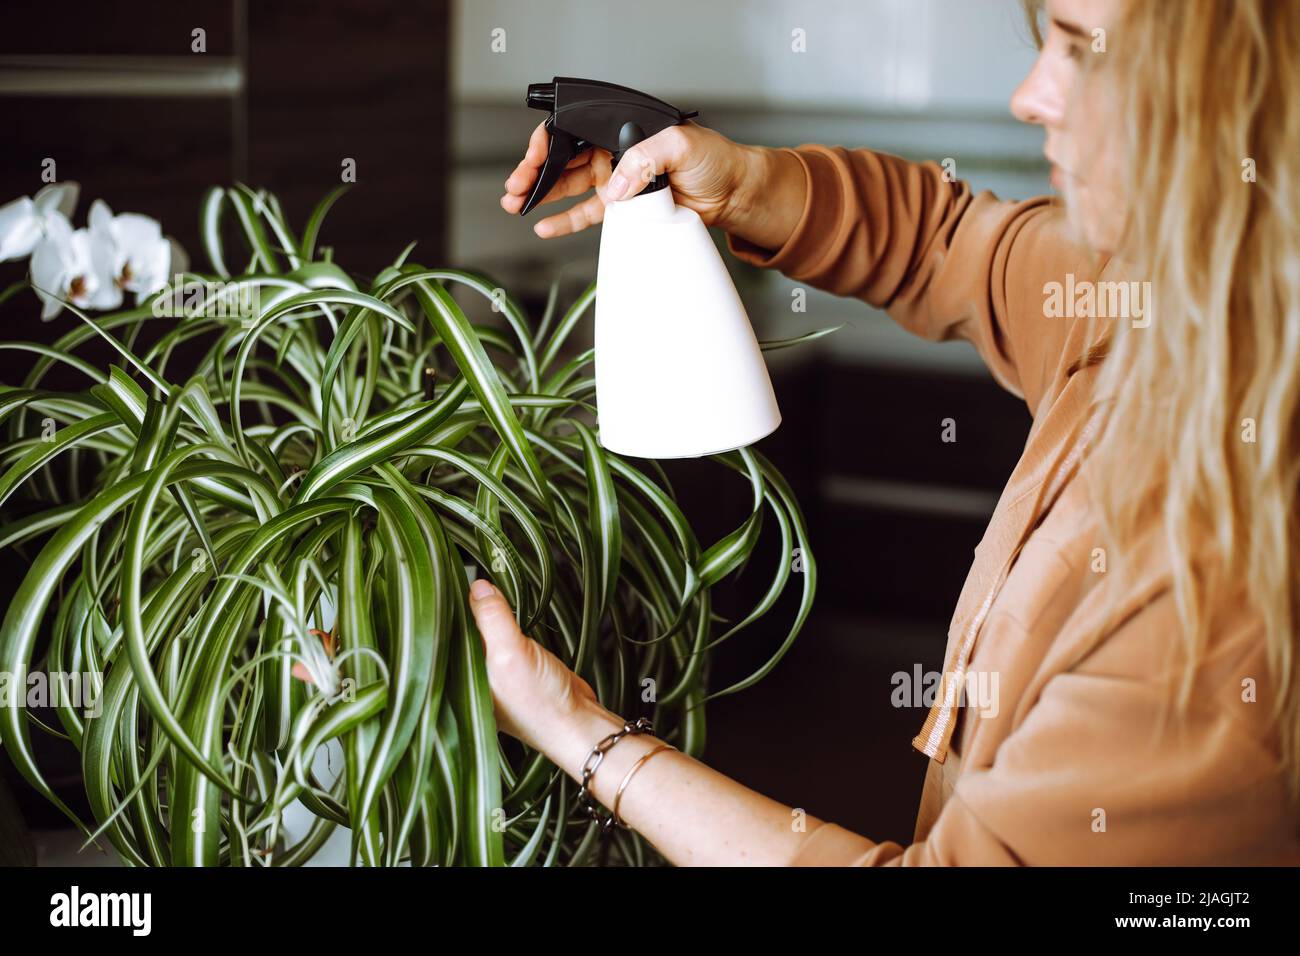 Side view of young woman with long wavy fair hair wearing brown sweatshirt, watering gorgeous indoor plant Chlorophytum. Stock Photo